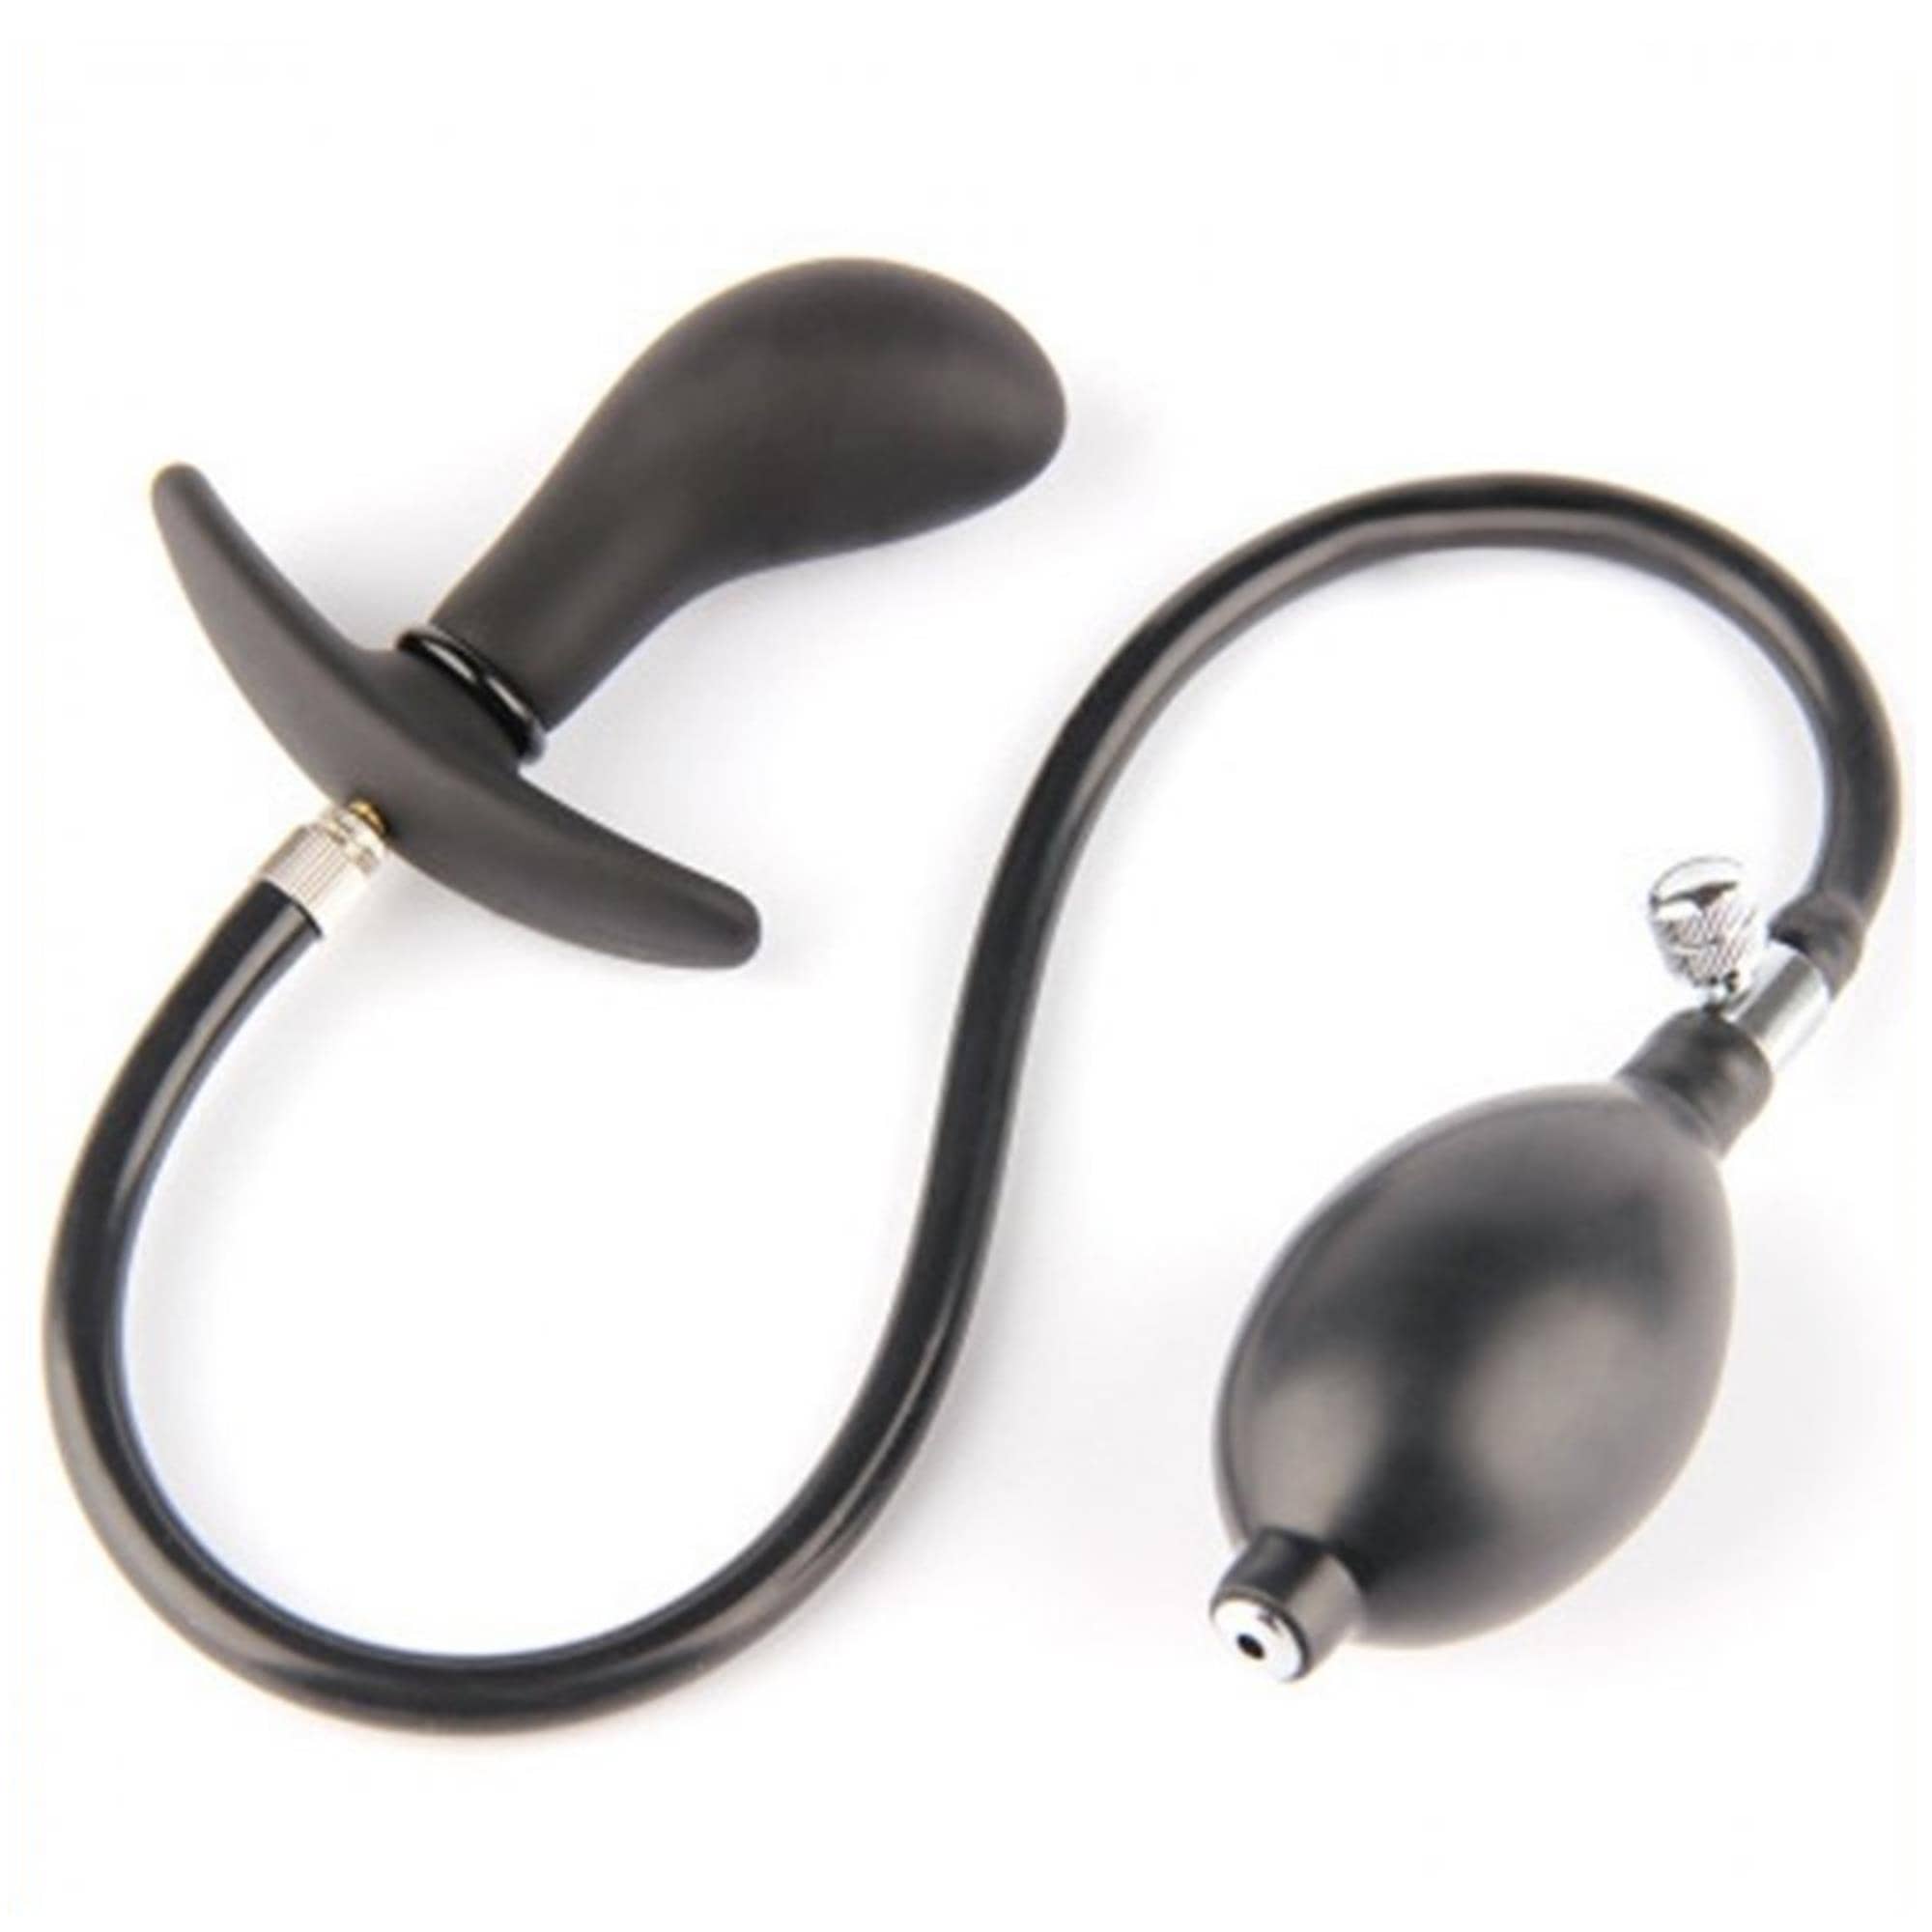 Inflate In Me - Prostate Massager thumbnail